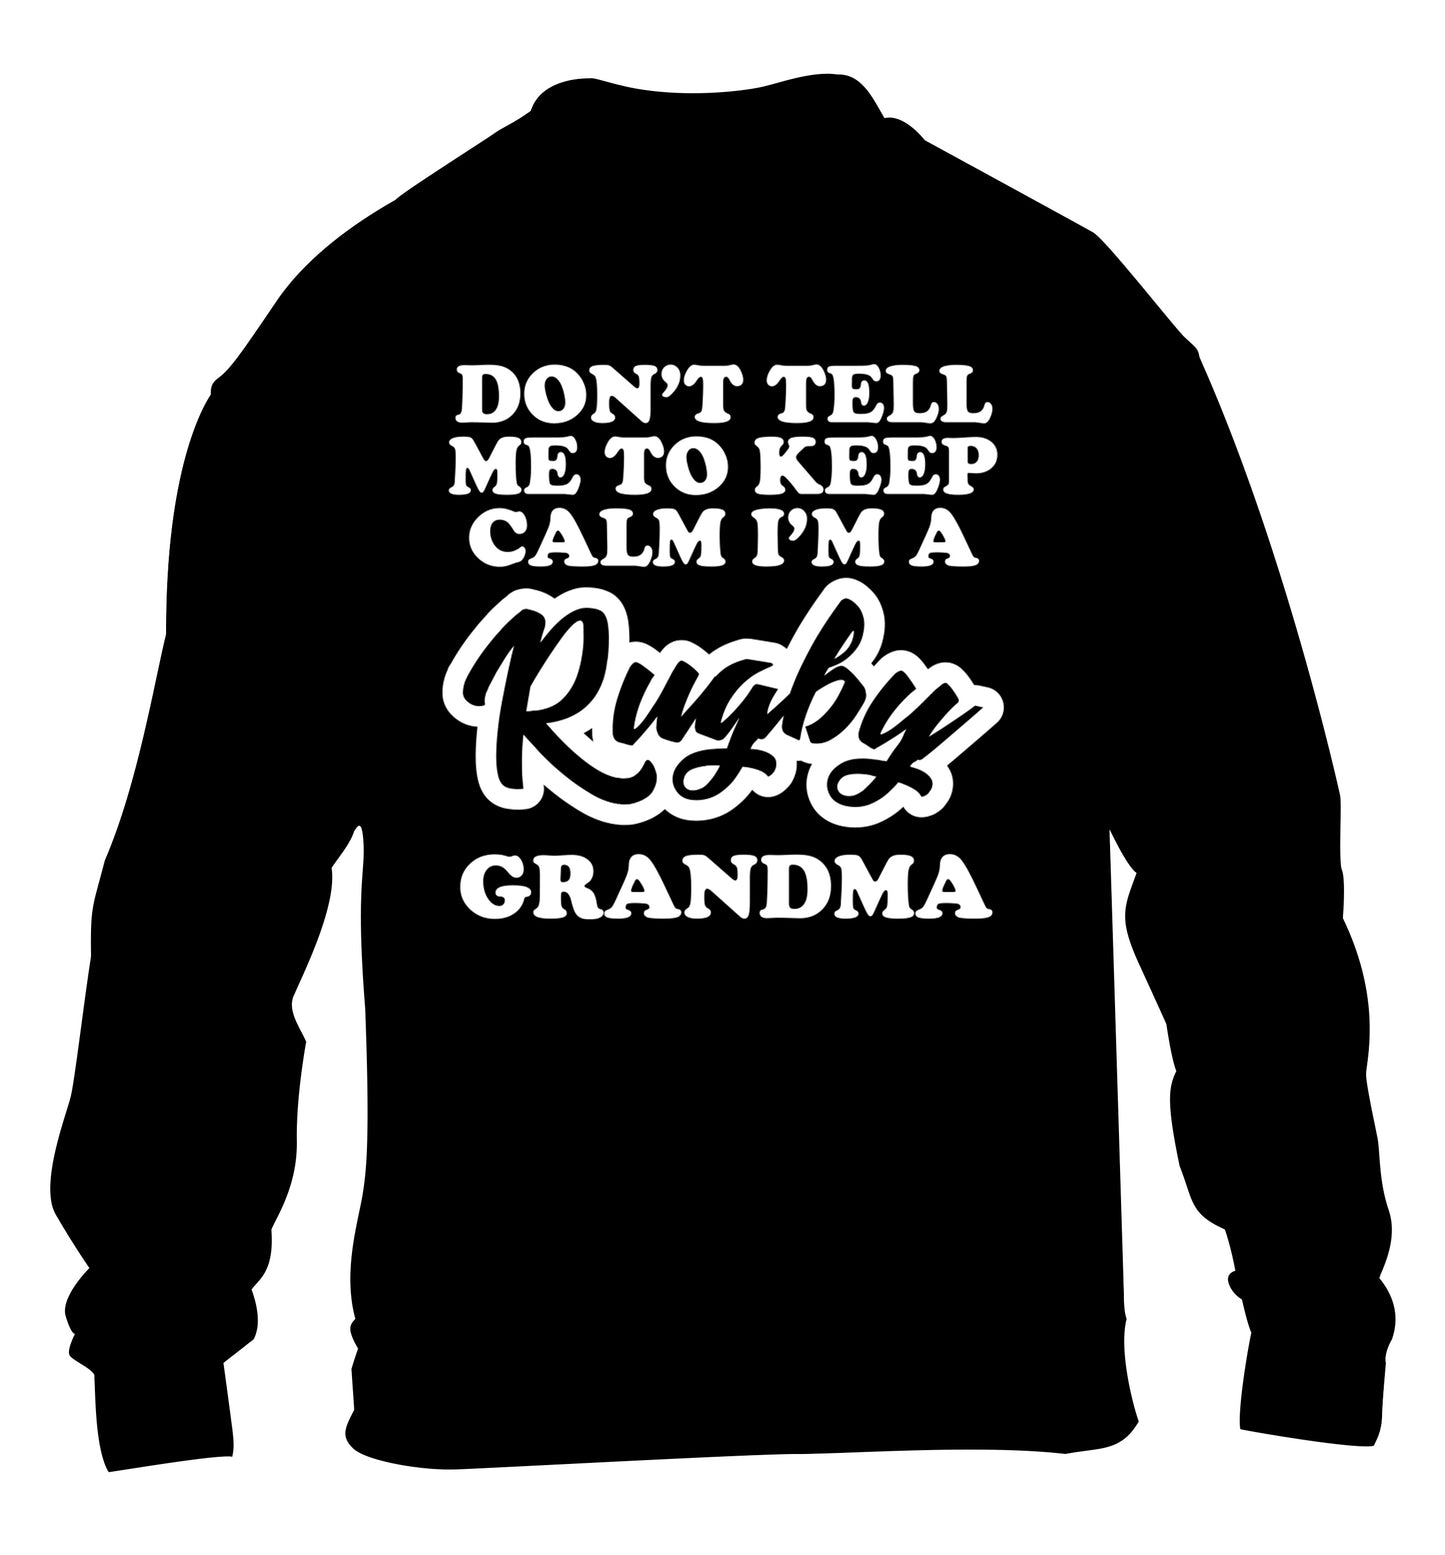 Don't tell me to keep calm I'm a rugby grandma children's black sweater 12-13 Years